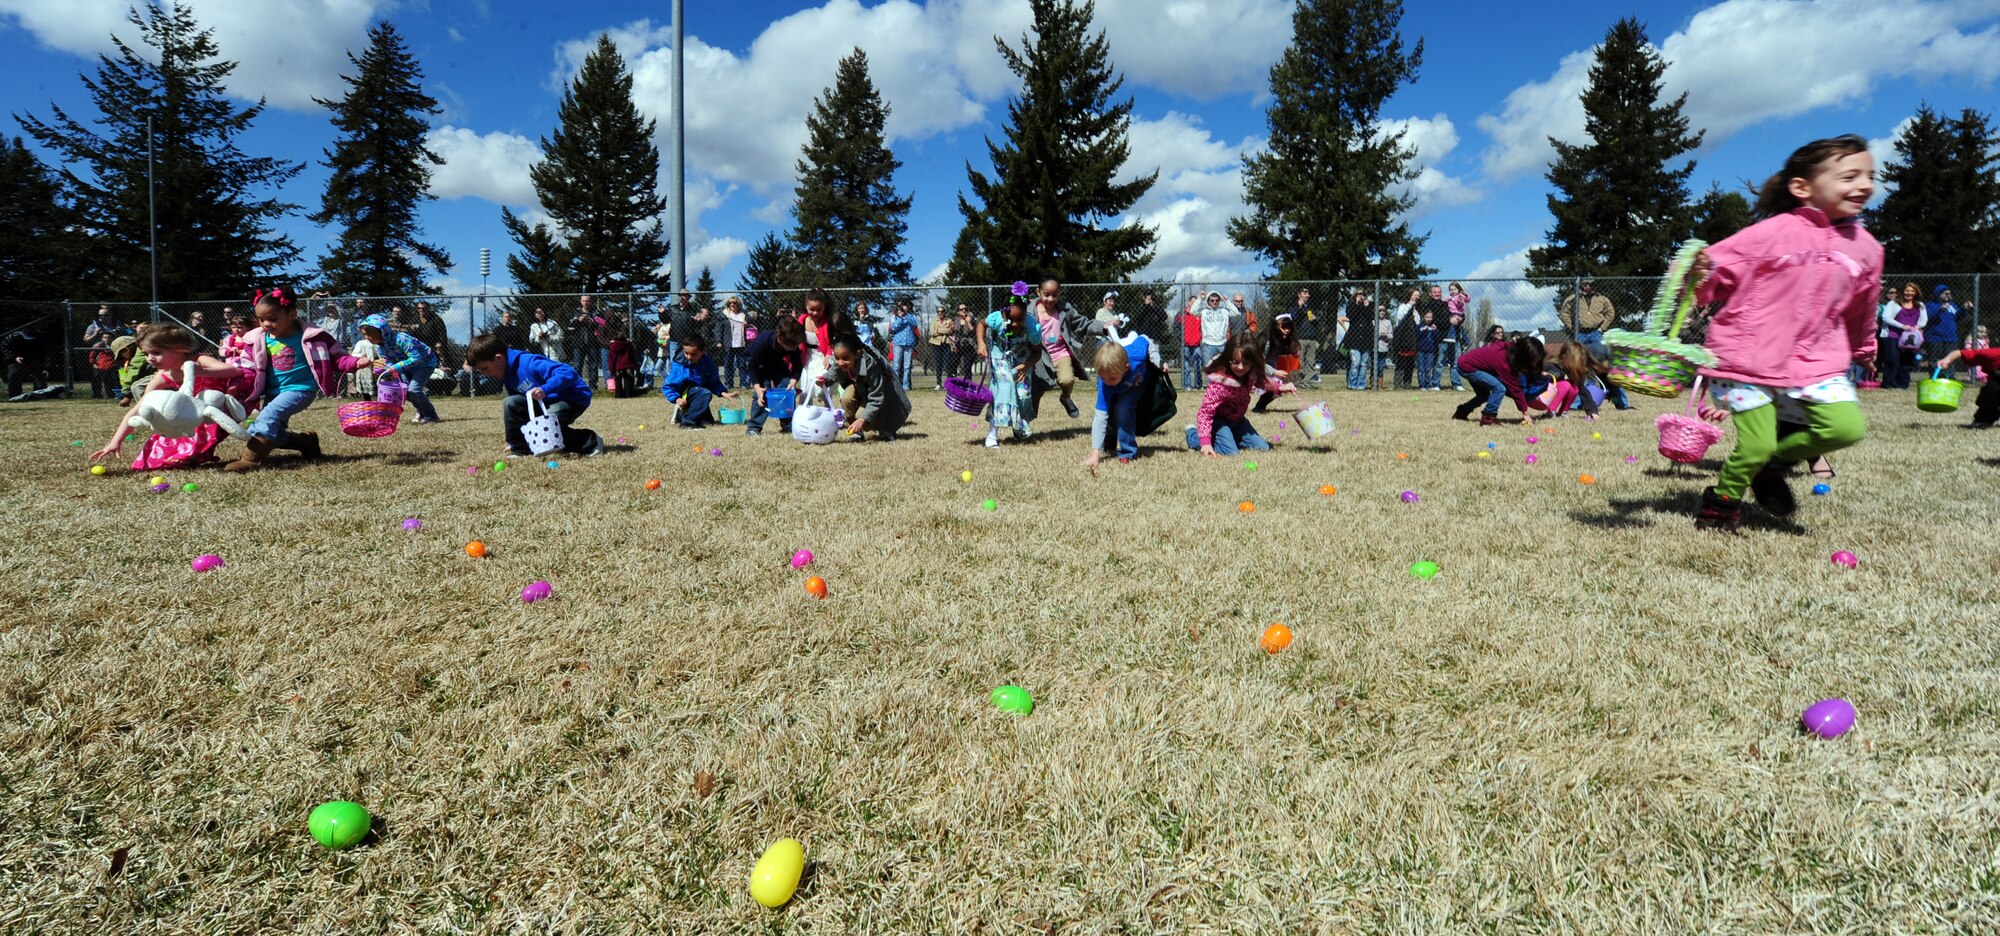 Children, ages 5 to 7, rush forward to retrieve Easter eggs scattered around the baseball field in Miller Park at Fairchild Air Force Base, Wash., April 7, 2012. The Easter egg hunt event was sponsored by Balfour Beatty. There was also a separate egg hunt designed especially for children ages 1 to 4. Prizes were raffled out to children that received eggs with a special ticket located inside. (U.S. Air Force photo by Airman 1st Class Taylor Curry/Released)